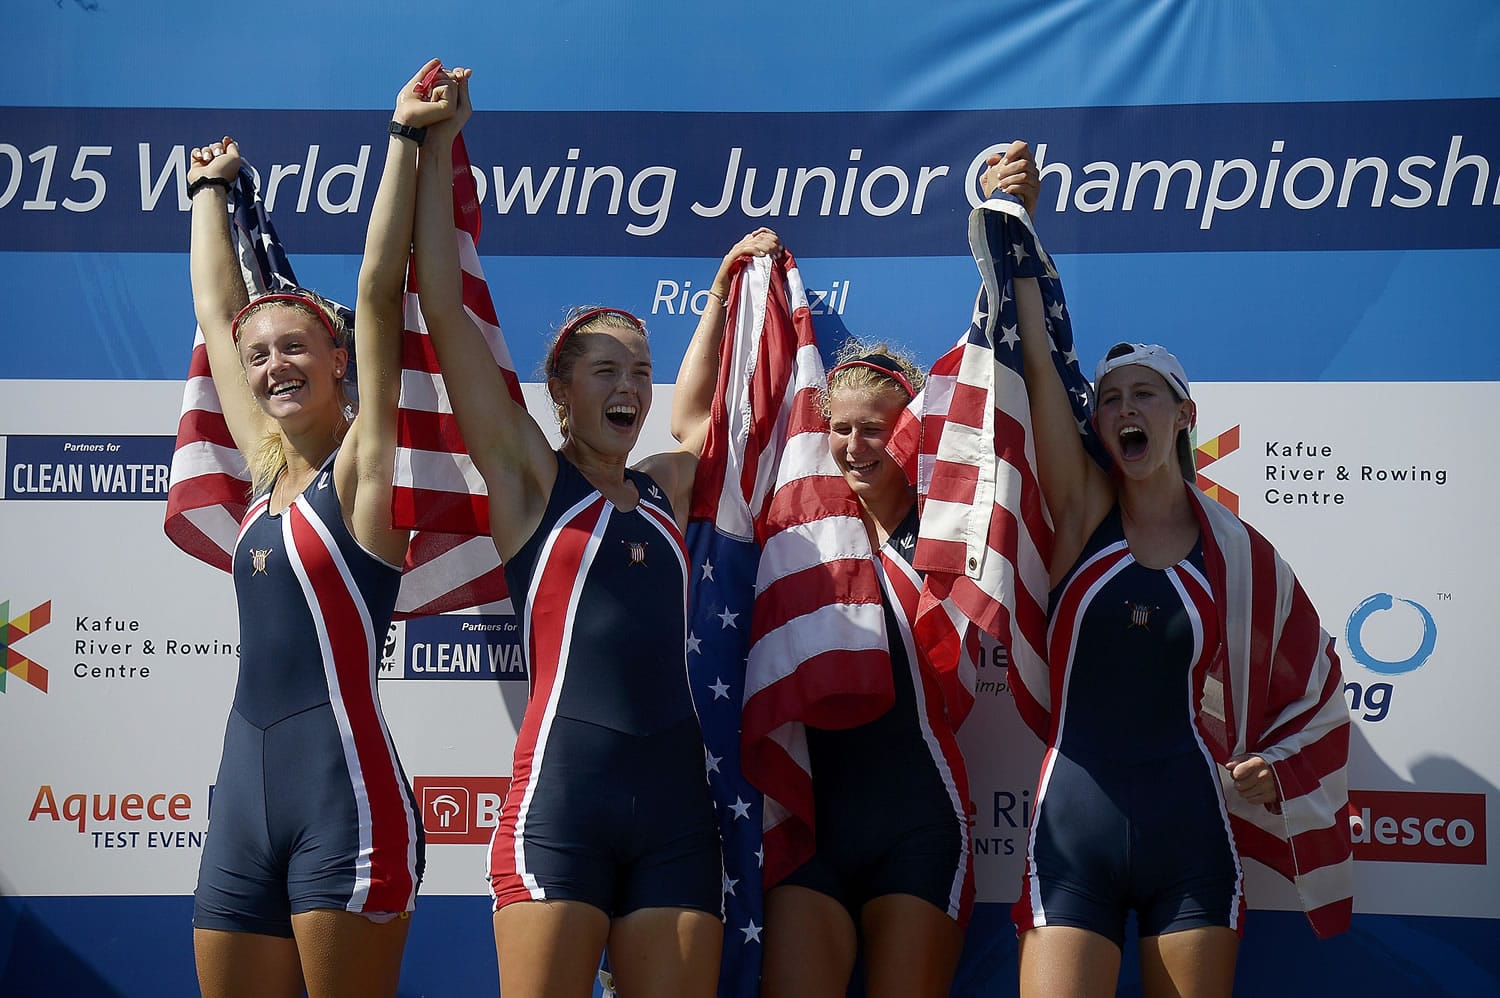 U.S. rowers, from left, Kaitlyn Kynast, Dana Moffat, Marlee Blue and Katy Gillingham celebrate winning the Junior Women's Four Final competition at the World Rowing Junior Championships at Rodrigo de Freitas lake in Rio de Janeiro, Brazil. American rowing officials are investigating why some rowers on their team came down with gastrointestinal illness at the contest, an event that concluded over the weekend and is being used as a trial run for next year's Rio de Janeiro Olympics.